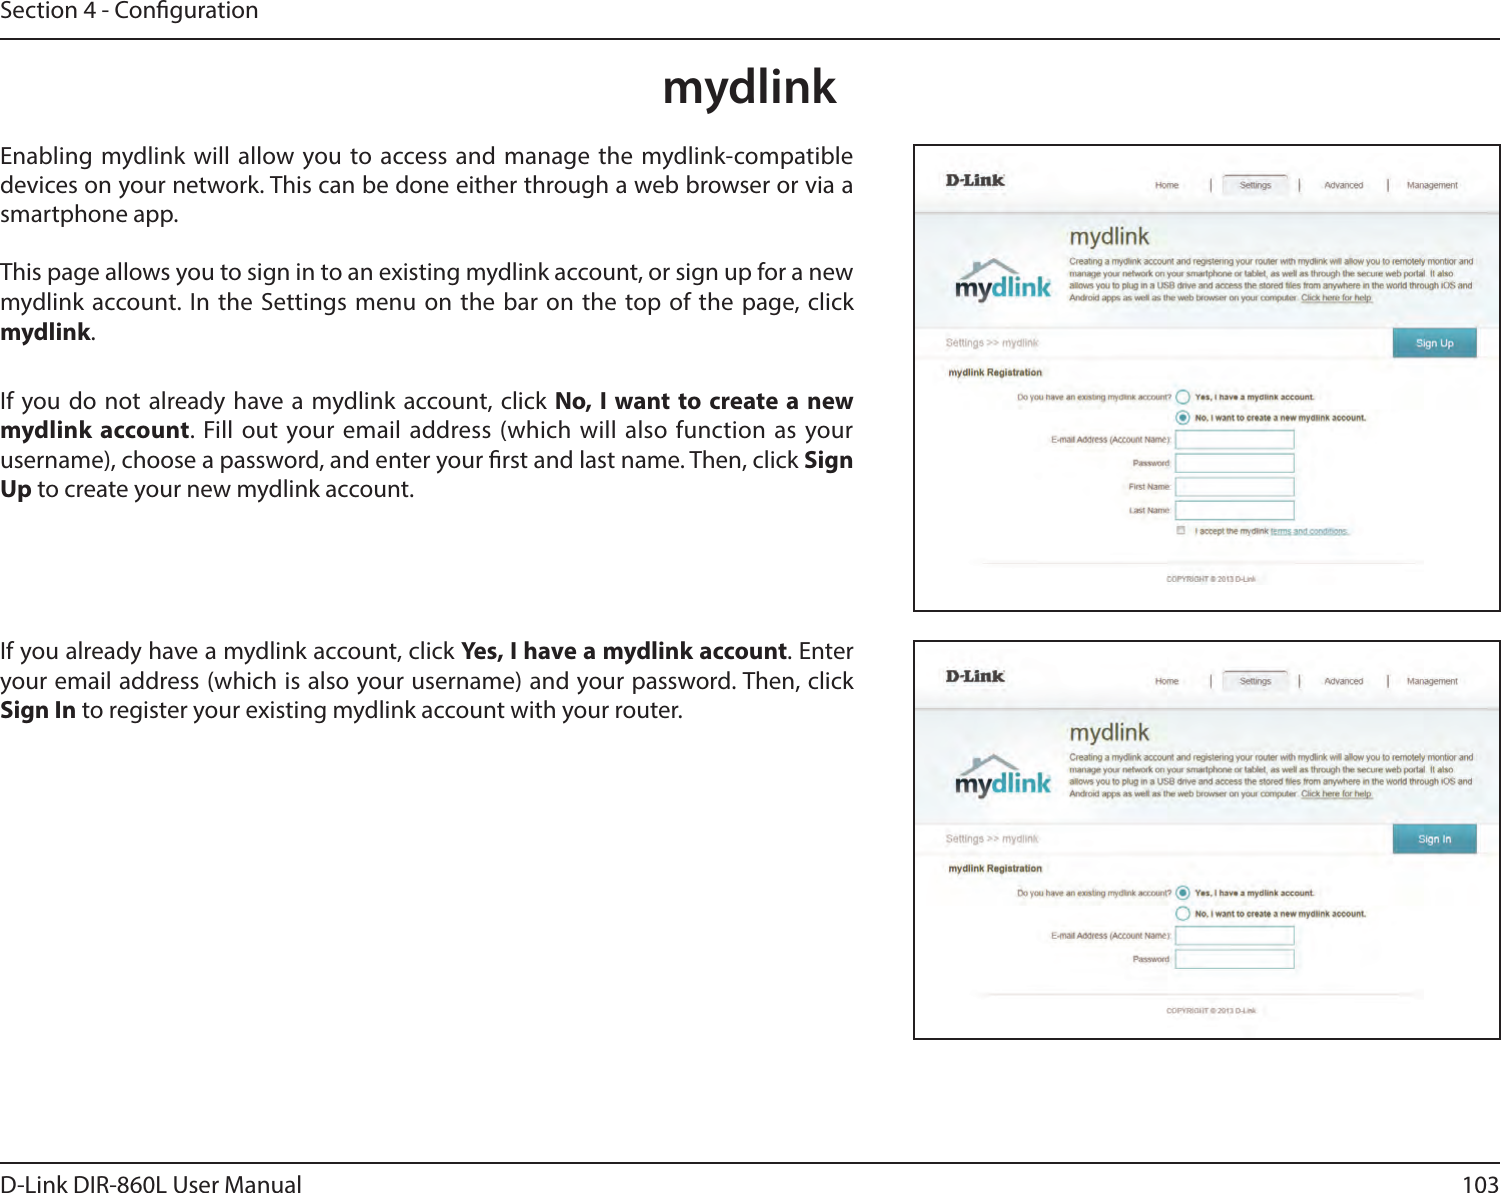 103D-Link DIR-860L User ManualSection 4 - CongurationmydlinkEnabling mydlink will allow you to access and manage the mydlink-compatible devices on your network. This can be done either through a web browser or via a smartphone app.This page allows you to sign in to an existing mydlink account, or sign up for a new mydlink account. In the Settings menu on the bar on the top of the page, click mydlink.If you do not already have a mydlink account, click No, I  want to create a new mydlink  account. Fill out your email address (which will also function as your username), choose a password, and enter your rst and last name. Then, click Sign Up to create your new mydlink account.If you already have a mydlink account, click Yes, I have a mydlink account. Enter your email address (which is also your username) and your password. Then, click Sign In to register your existing mydlink account with your router.